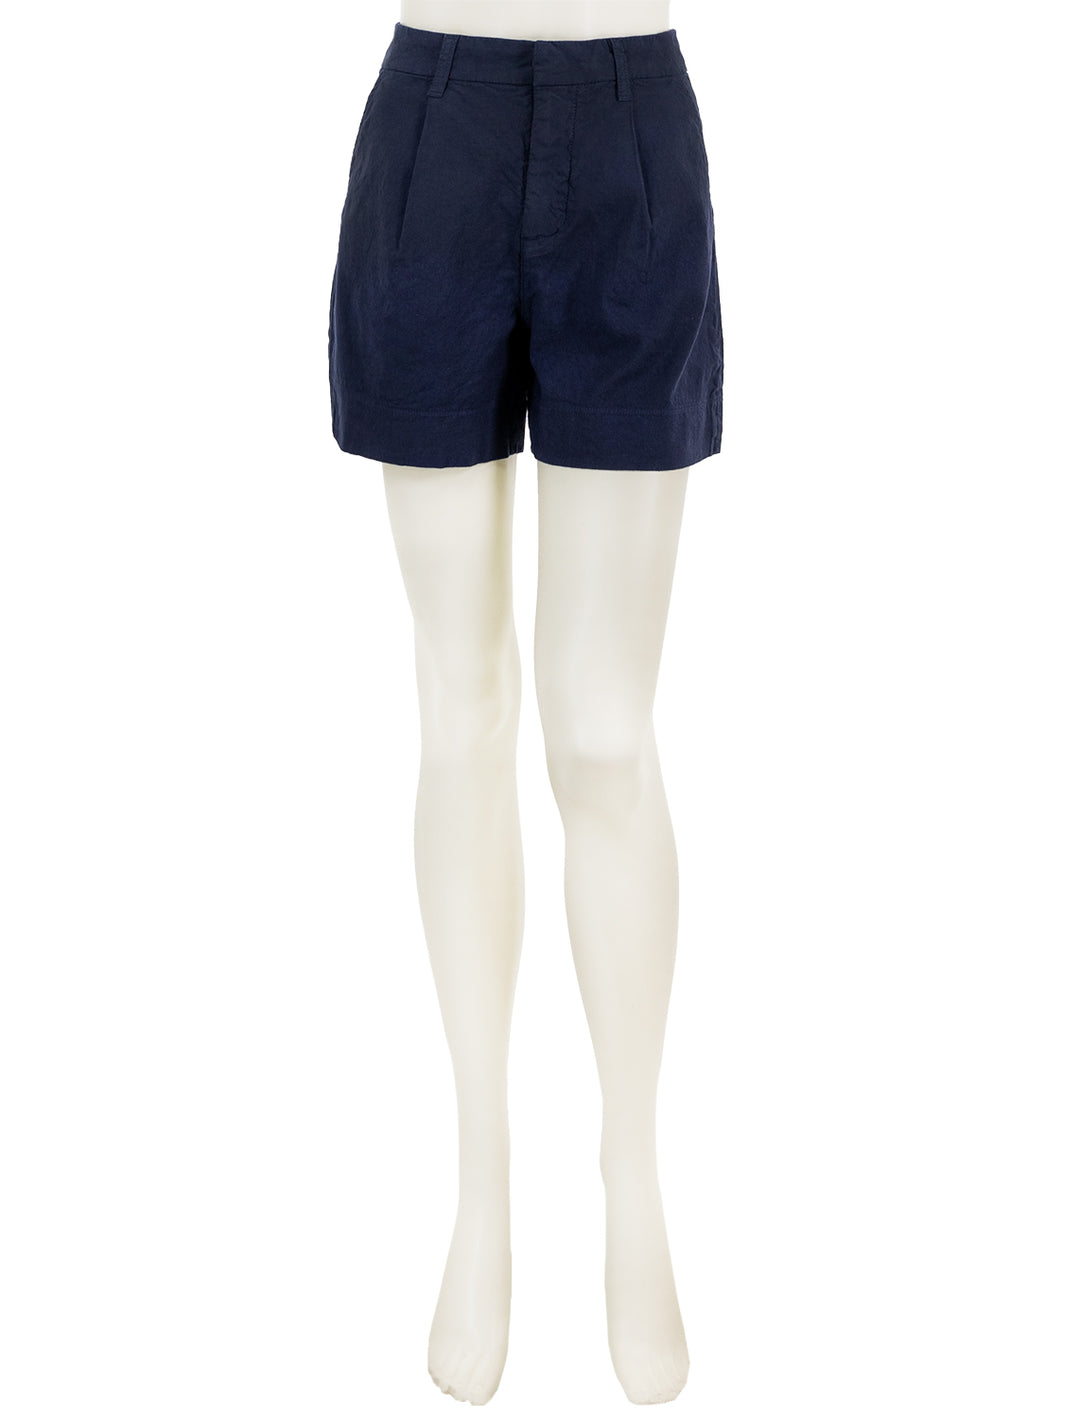 Front view of Frank & Eileen's waterford walking short in navy.